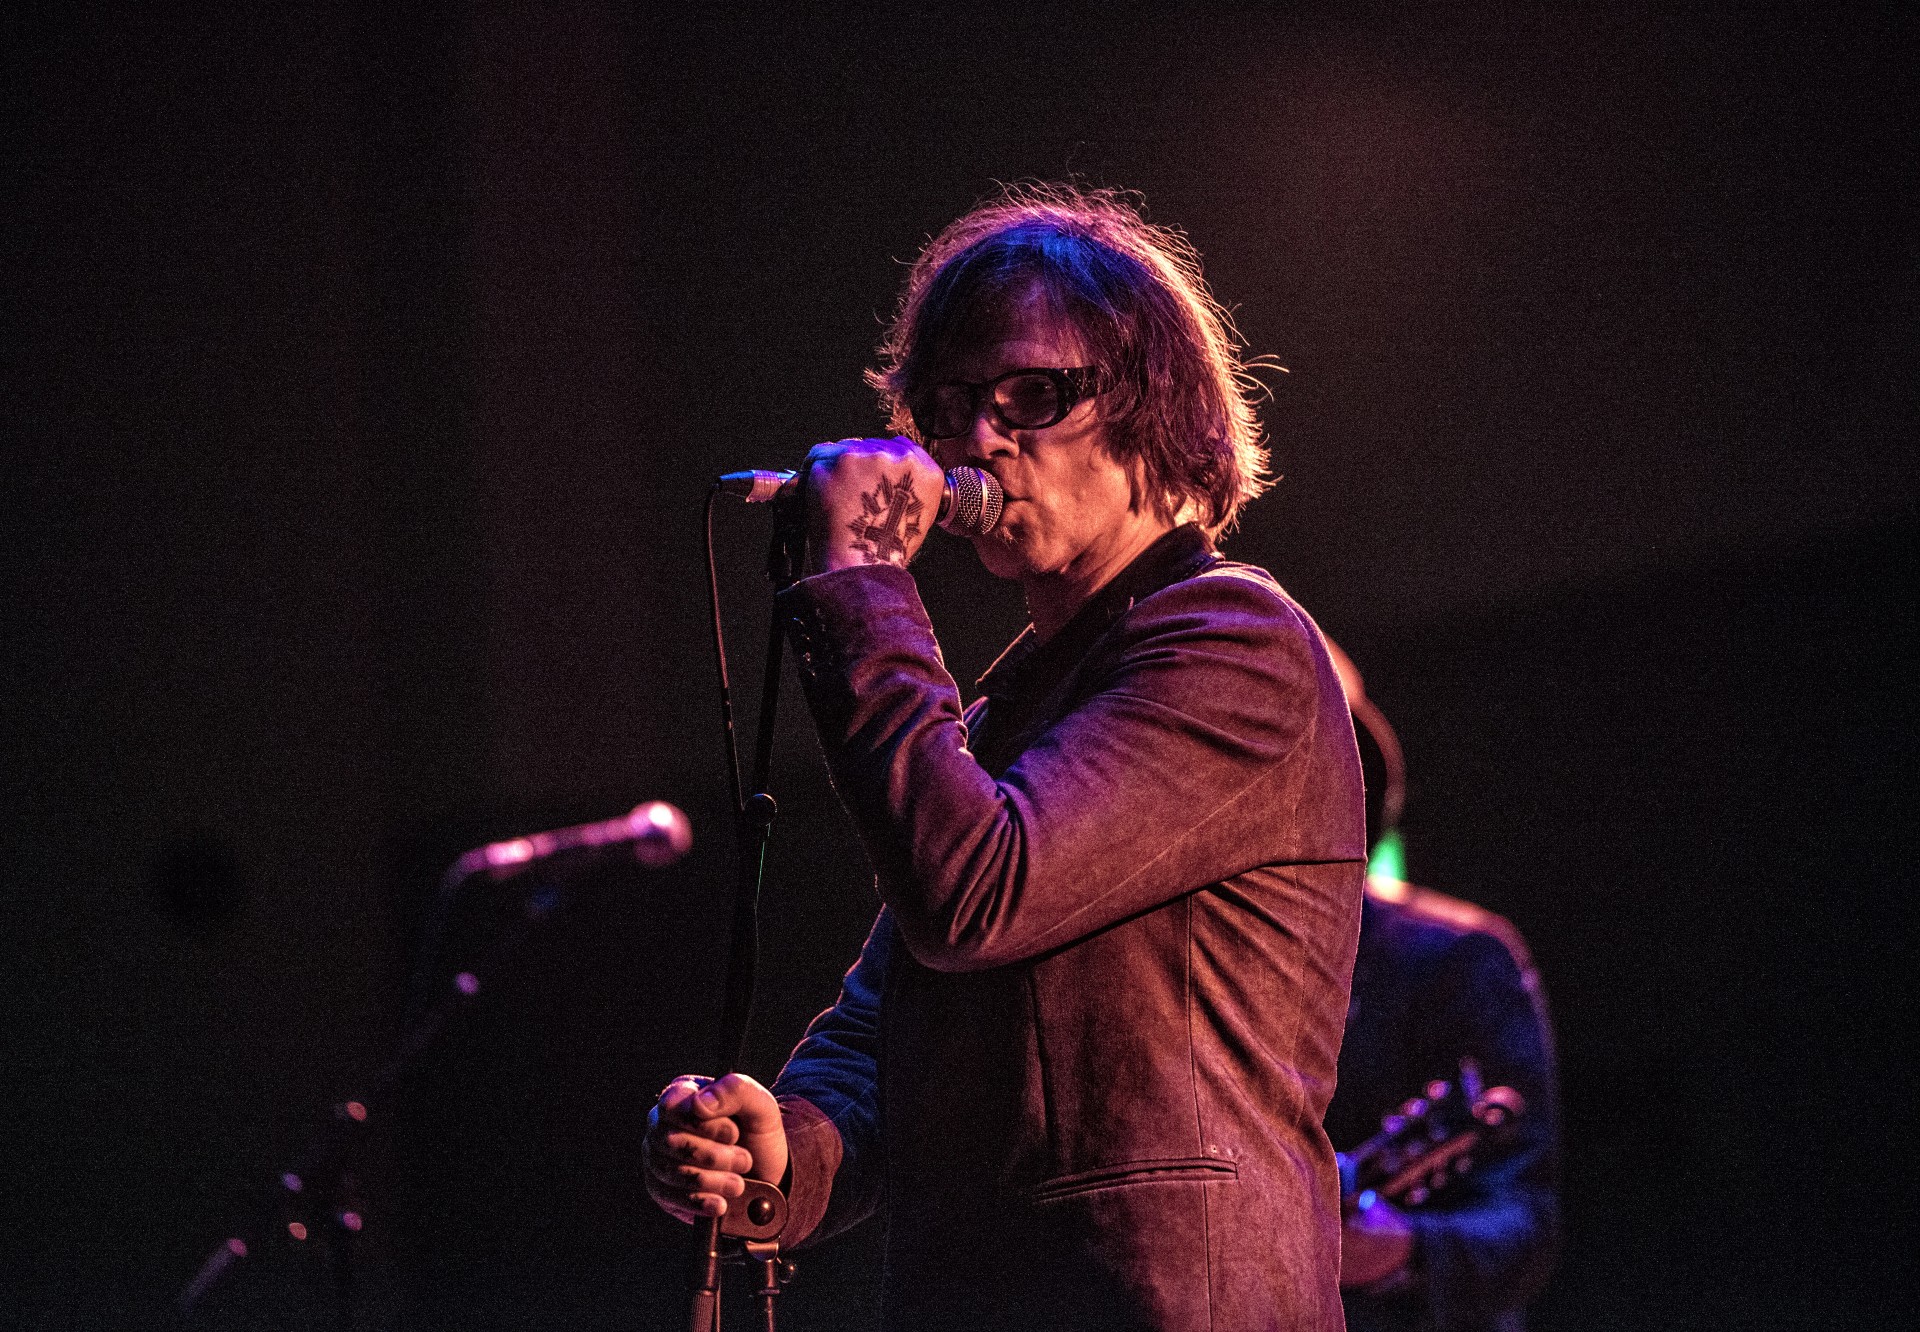 Mark Lanegan performs in a dark suit at a concert.